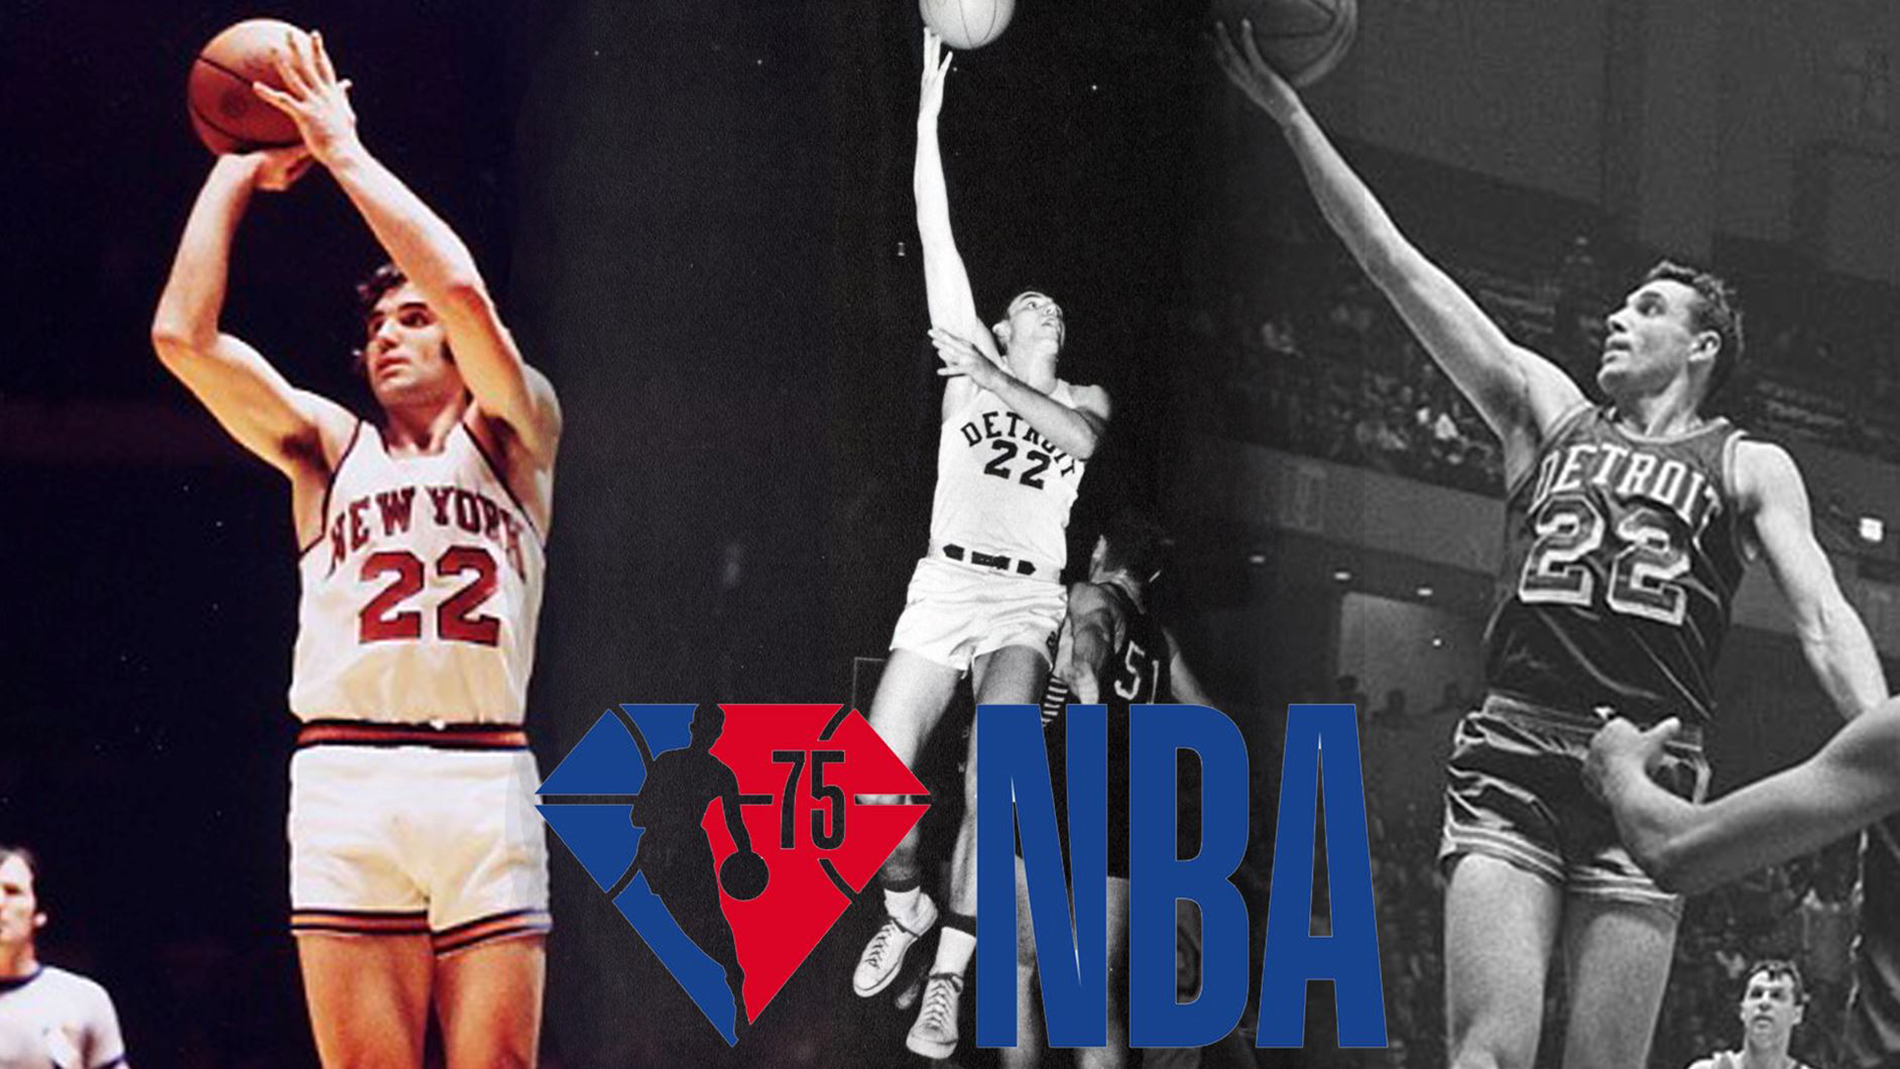 A graphic of Dave DeBusschere during his career with the Knicks, Titans and Pistons, featuring the NBA 75 logo (which features the regular NBA logo inside a diamond with 75 inside)